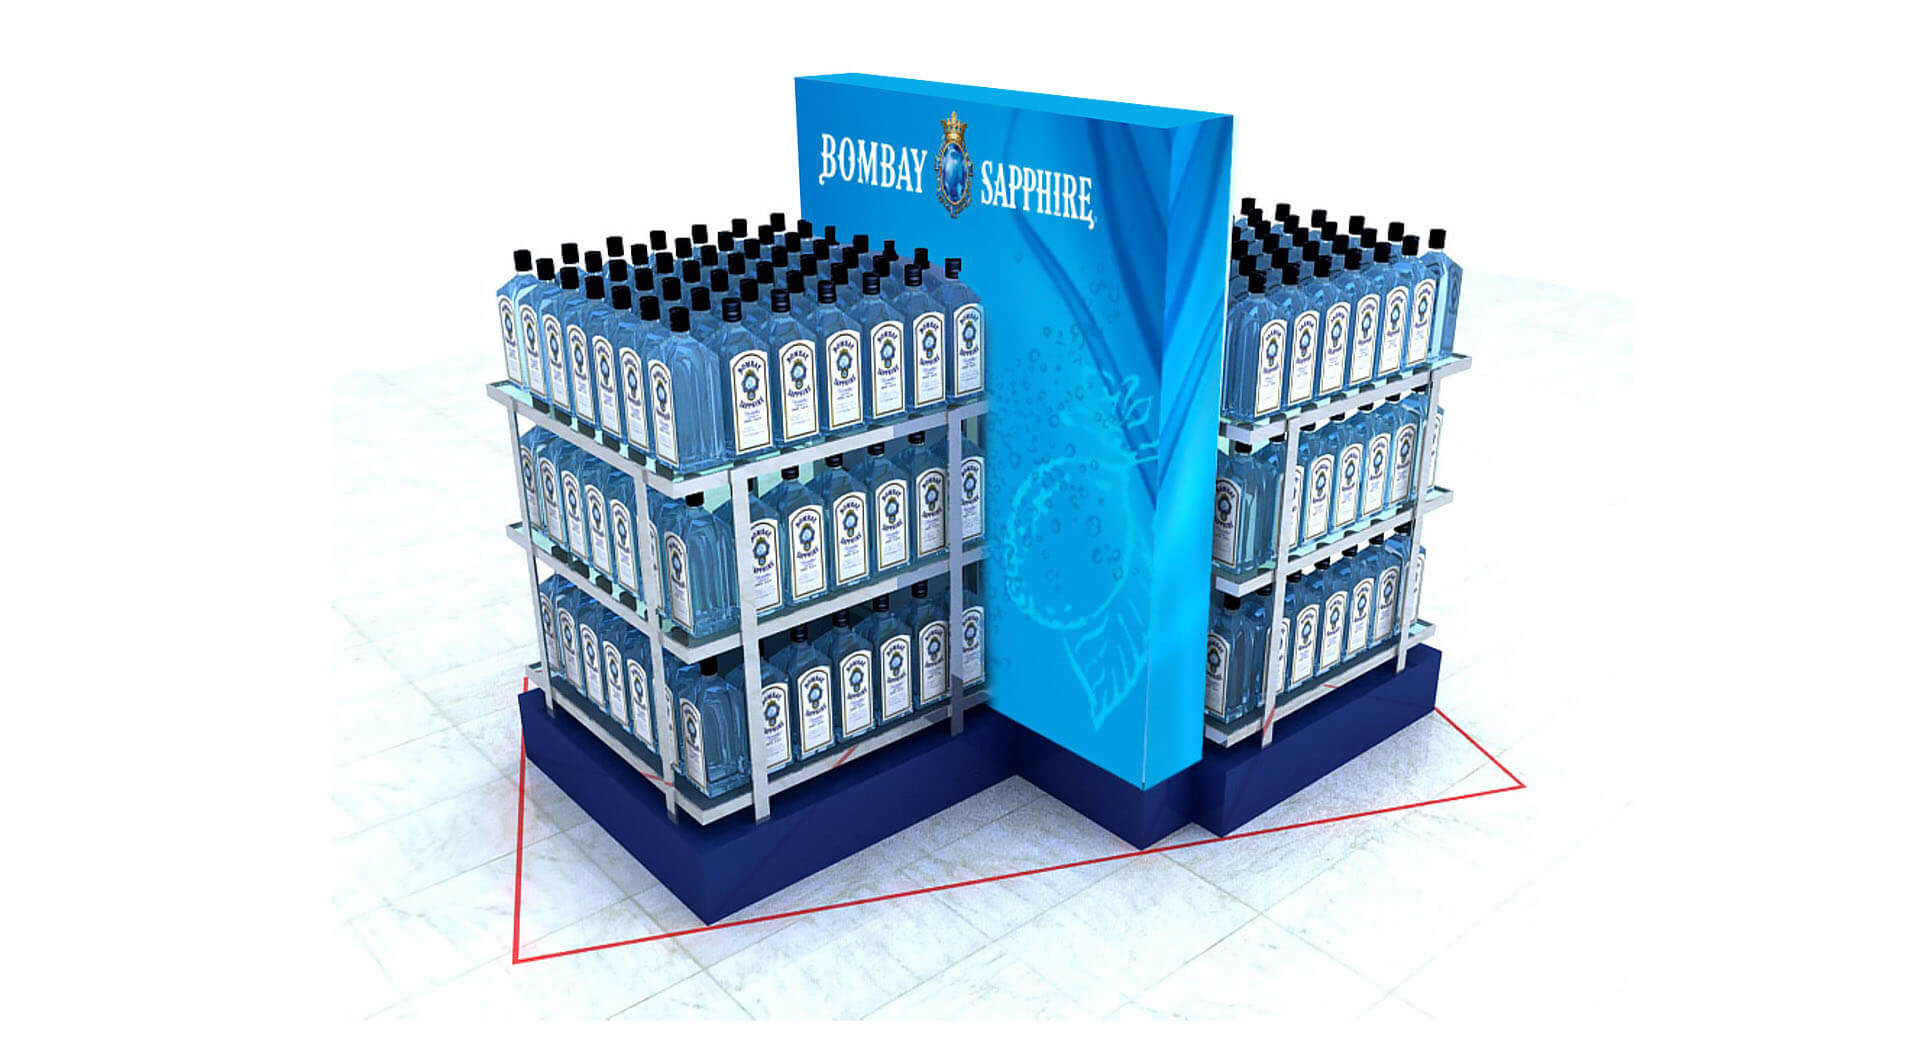 Bombay Sapphire Collins Spirits industry duty-free alcohol merchandising concepts 